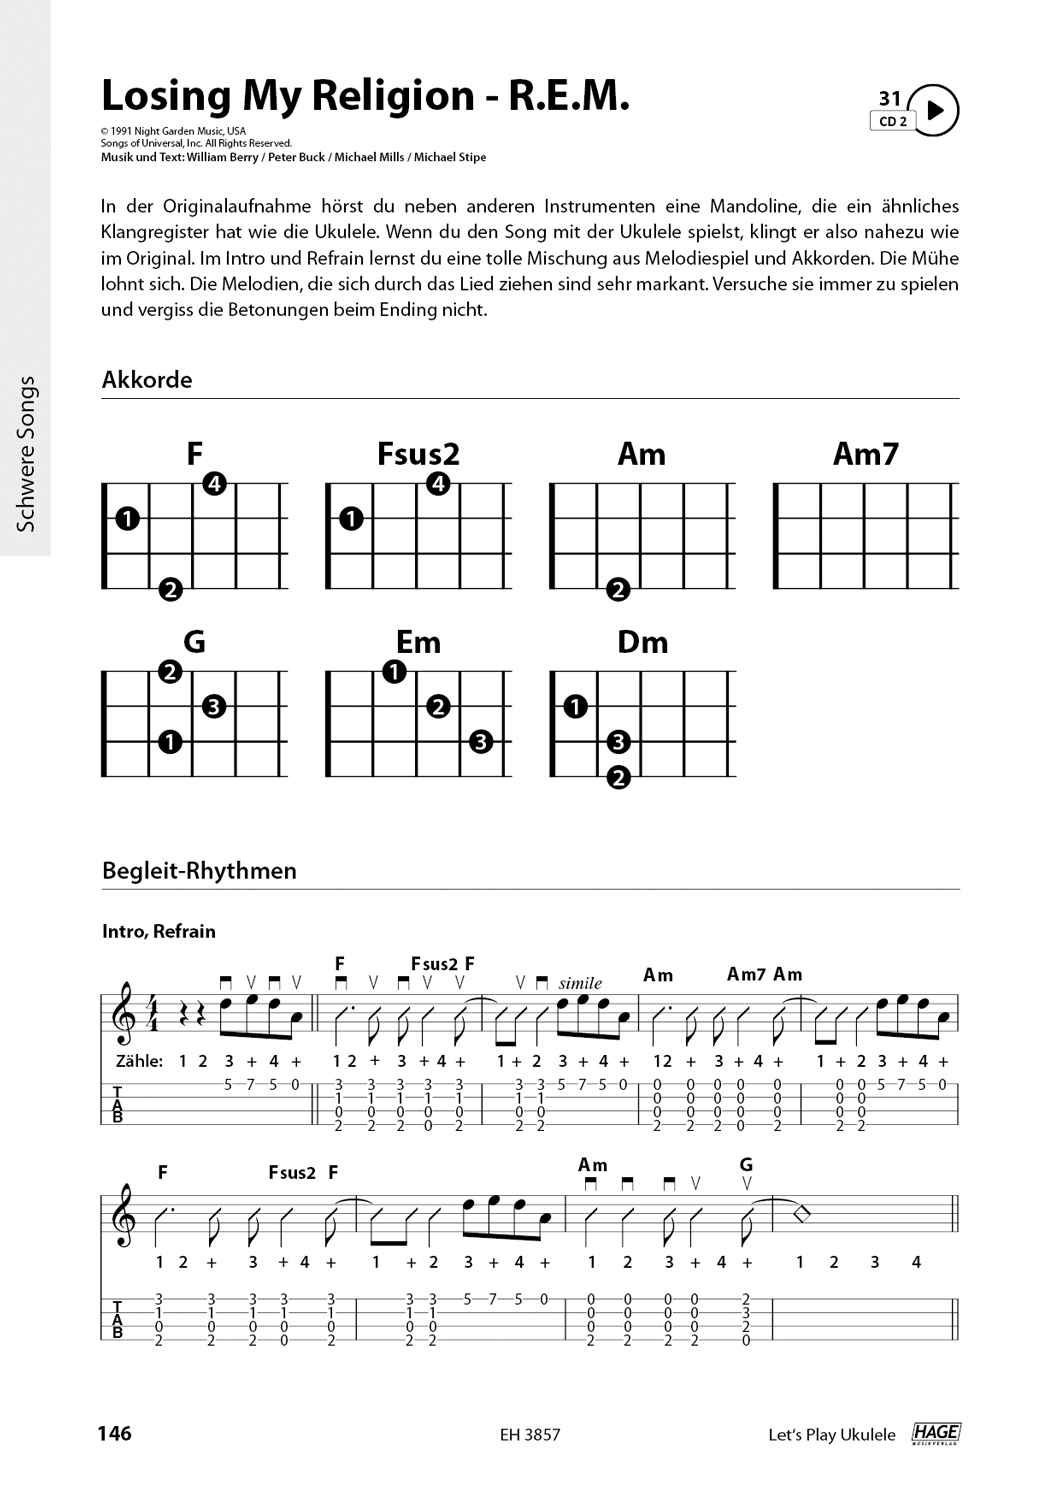 Let's Play Ukulele (with 2 CDs) Pages 10